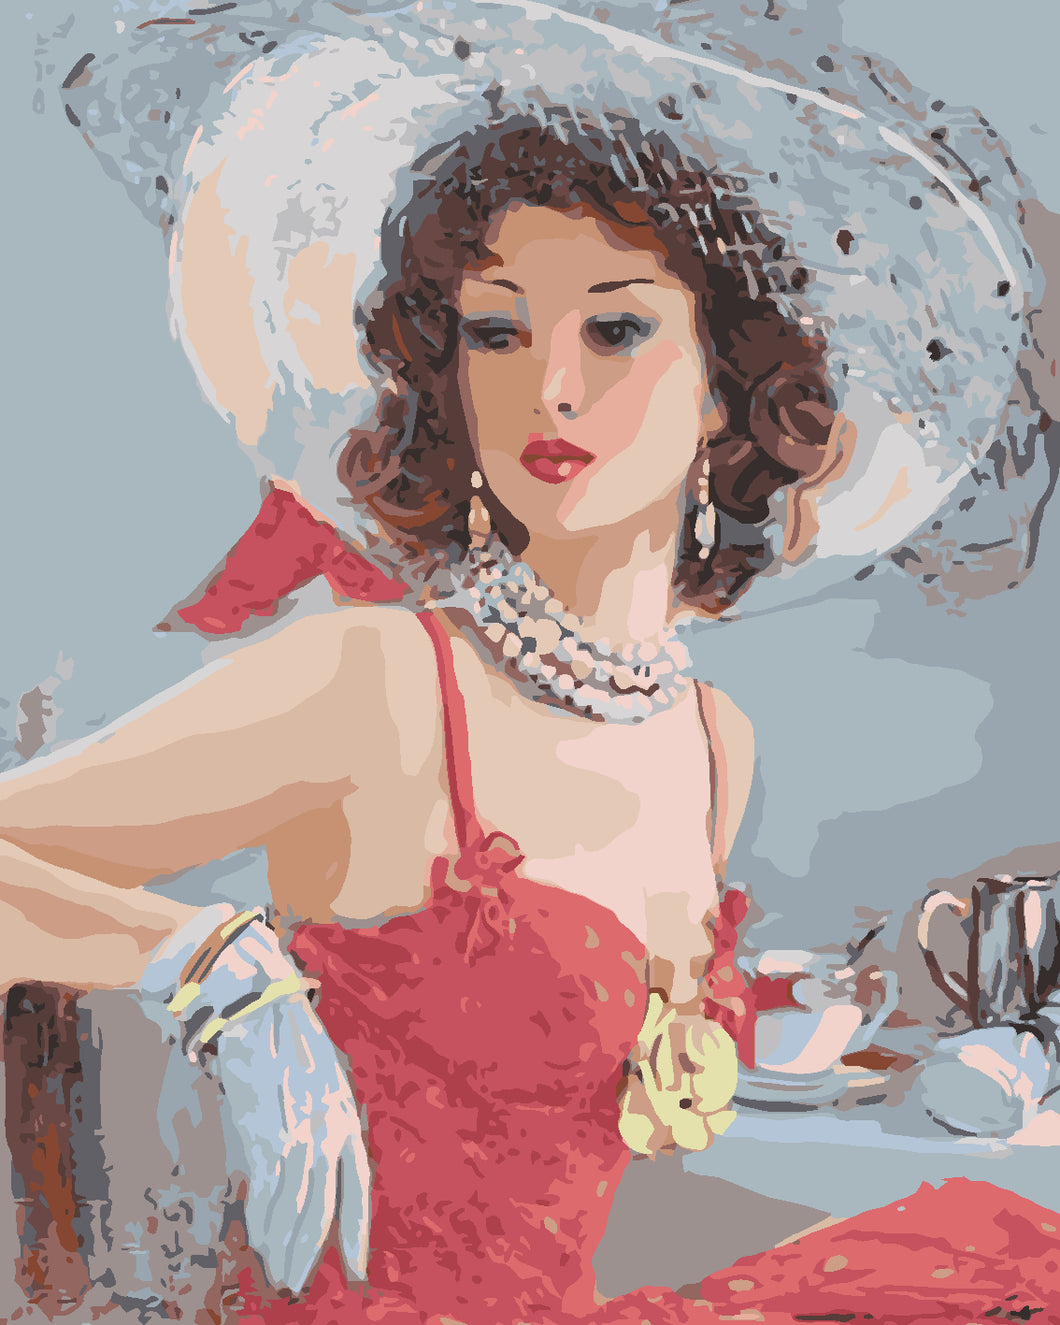 Elegant woman in jewellery - DIY Paint By Numbers Kits for Adults